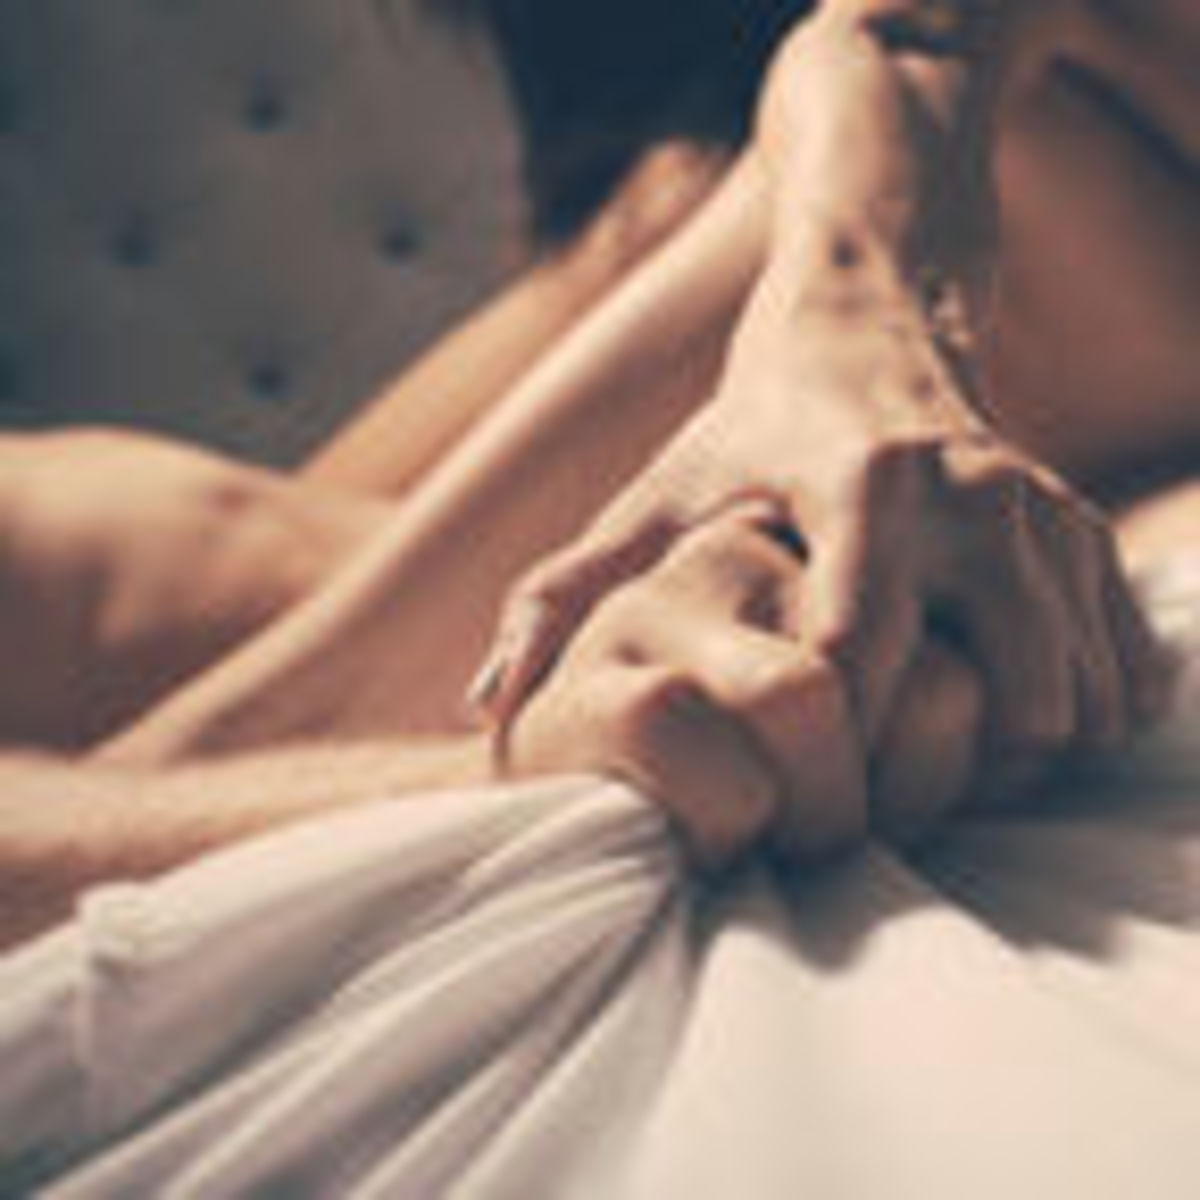 Romantic Before Sleep Sex - There May Be a Better Way to Initiate Sex with Your Partner ...